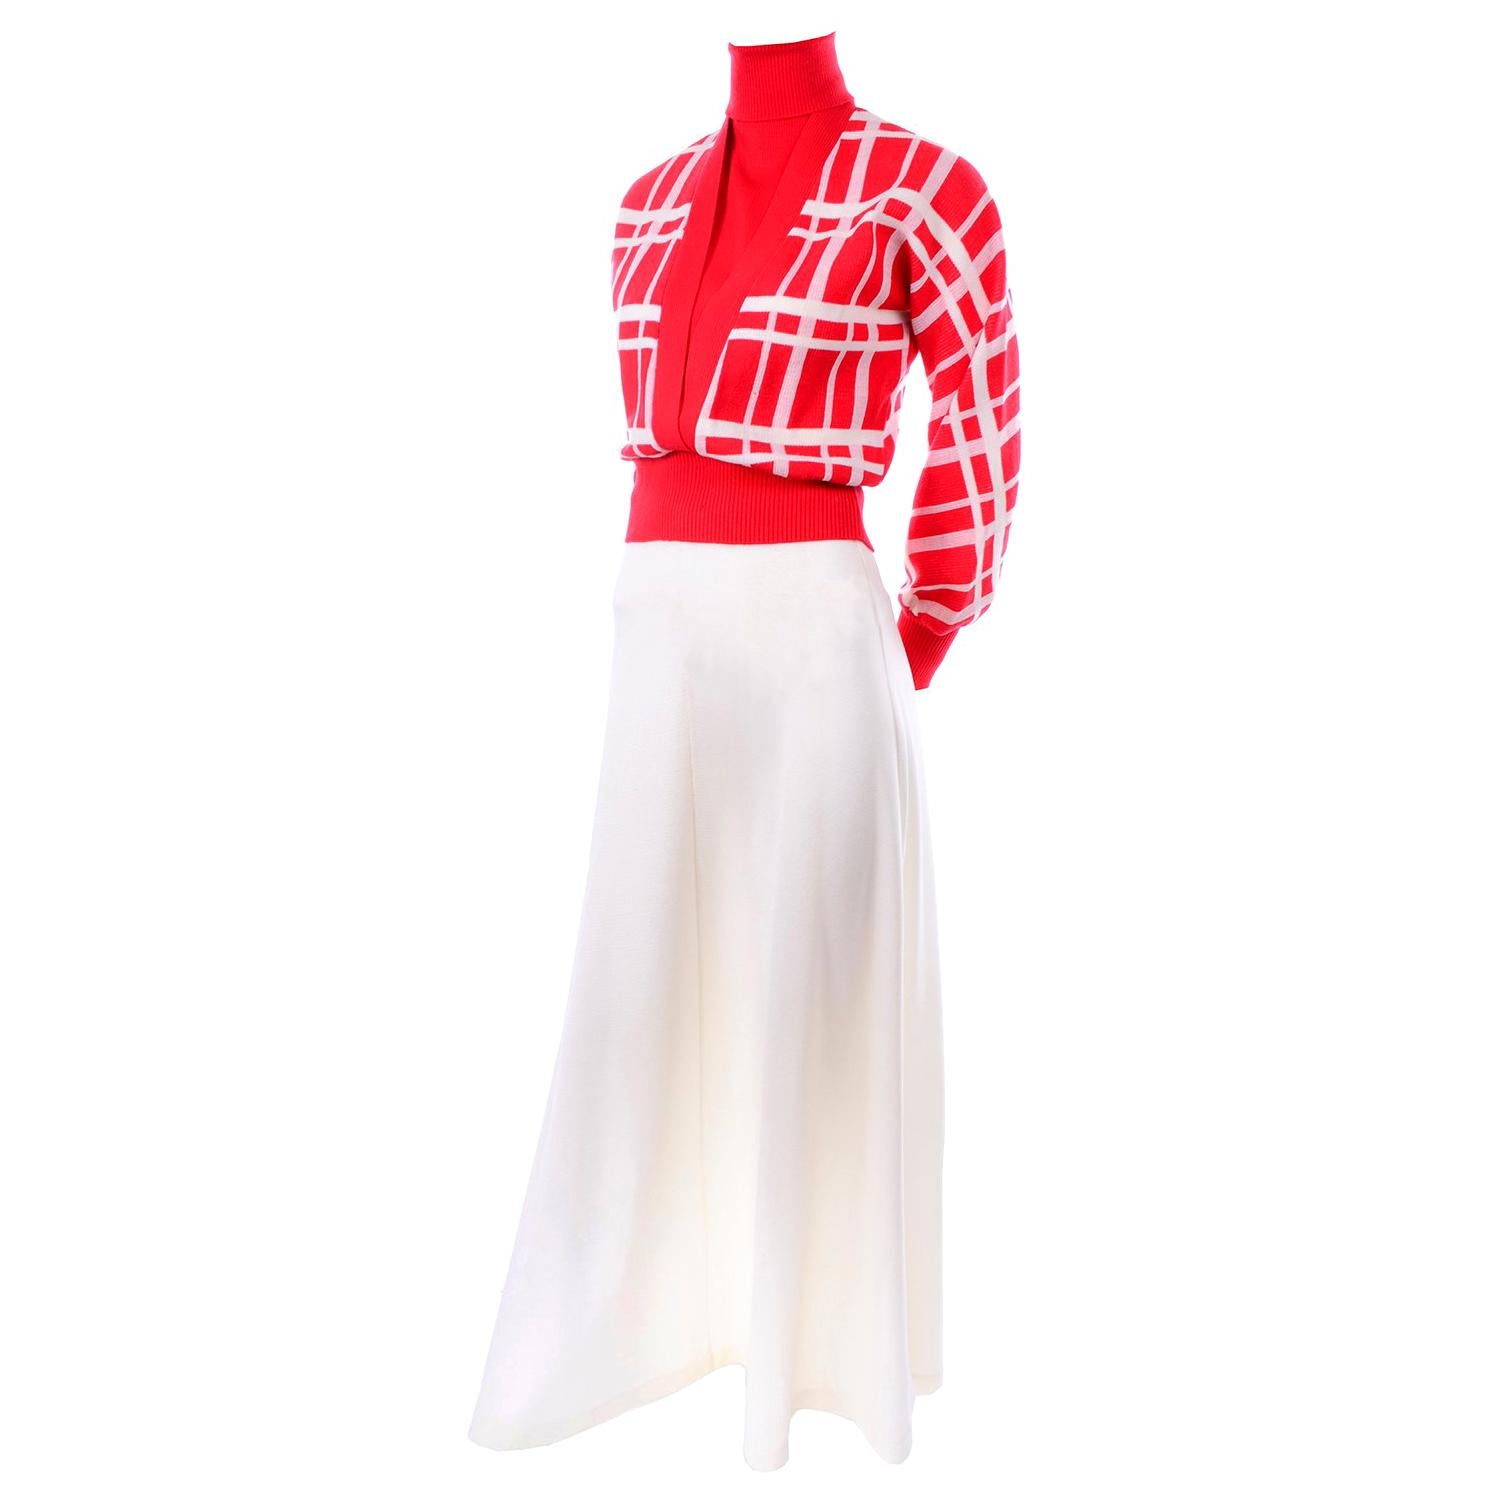 Deadstock Crissa Italy Vintage 1970s Red & White Knit Maxi Skirt and Sweater Top